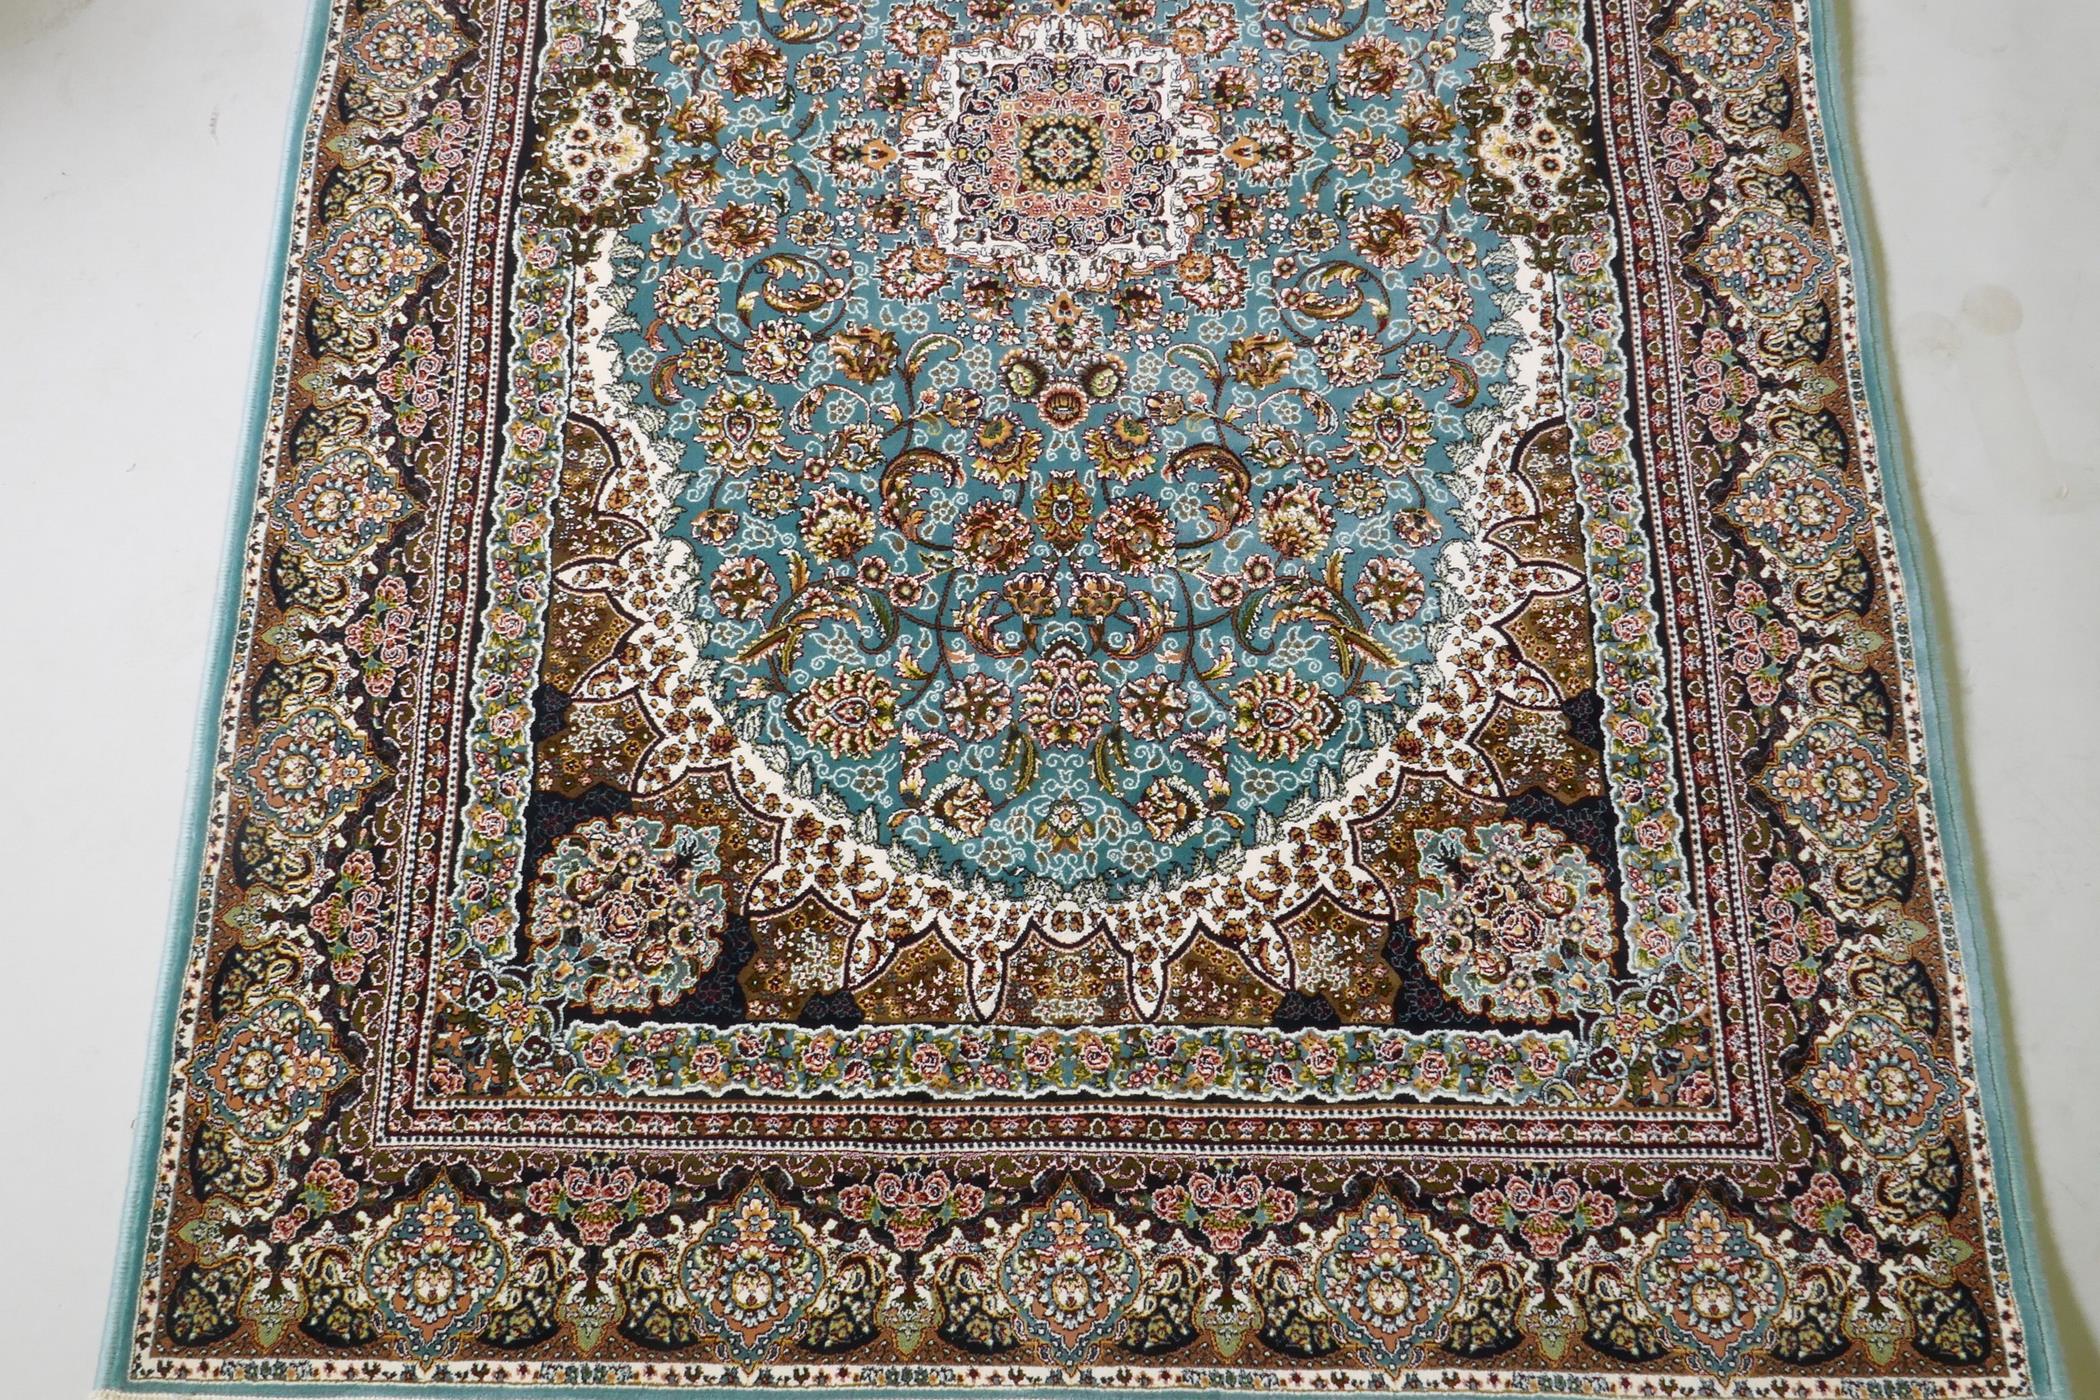 A fine woven full pile Iranian carpet with traditional floral medallion design on a turquoise field, - Image 3 of 5